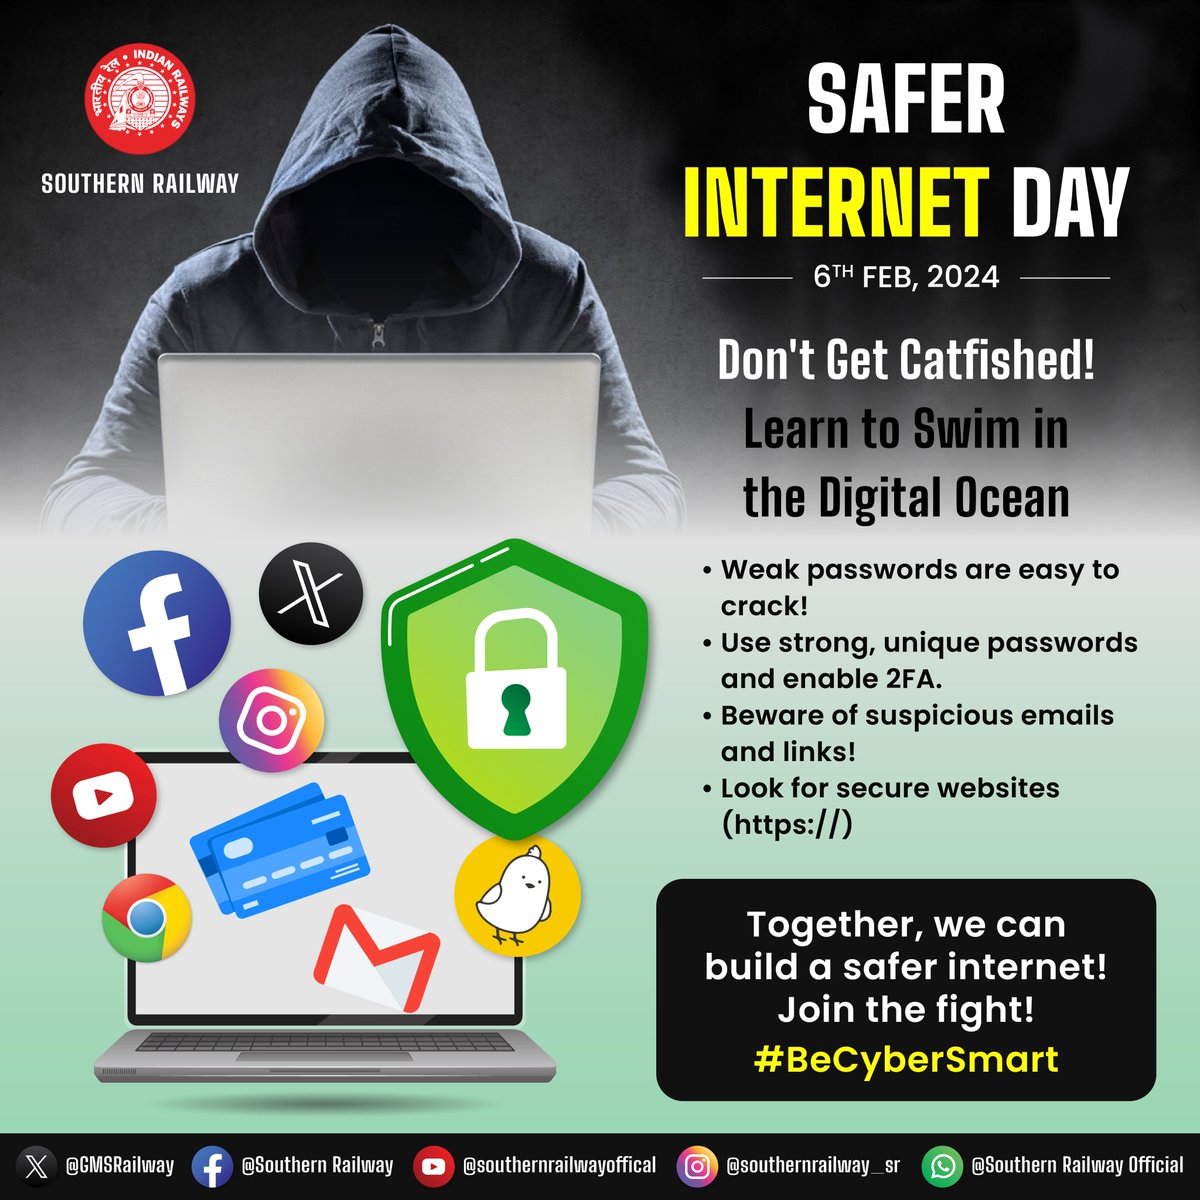 The internet can be a wild place, but you don't have to be bait!  

This #SaferInternetDay, learn to swim safely with these essential tips. ‍♀️

 #BeCyberSmart #OnlineSafetyForEveryone #BeTheChange #Southernrailway